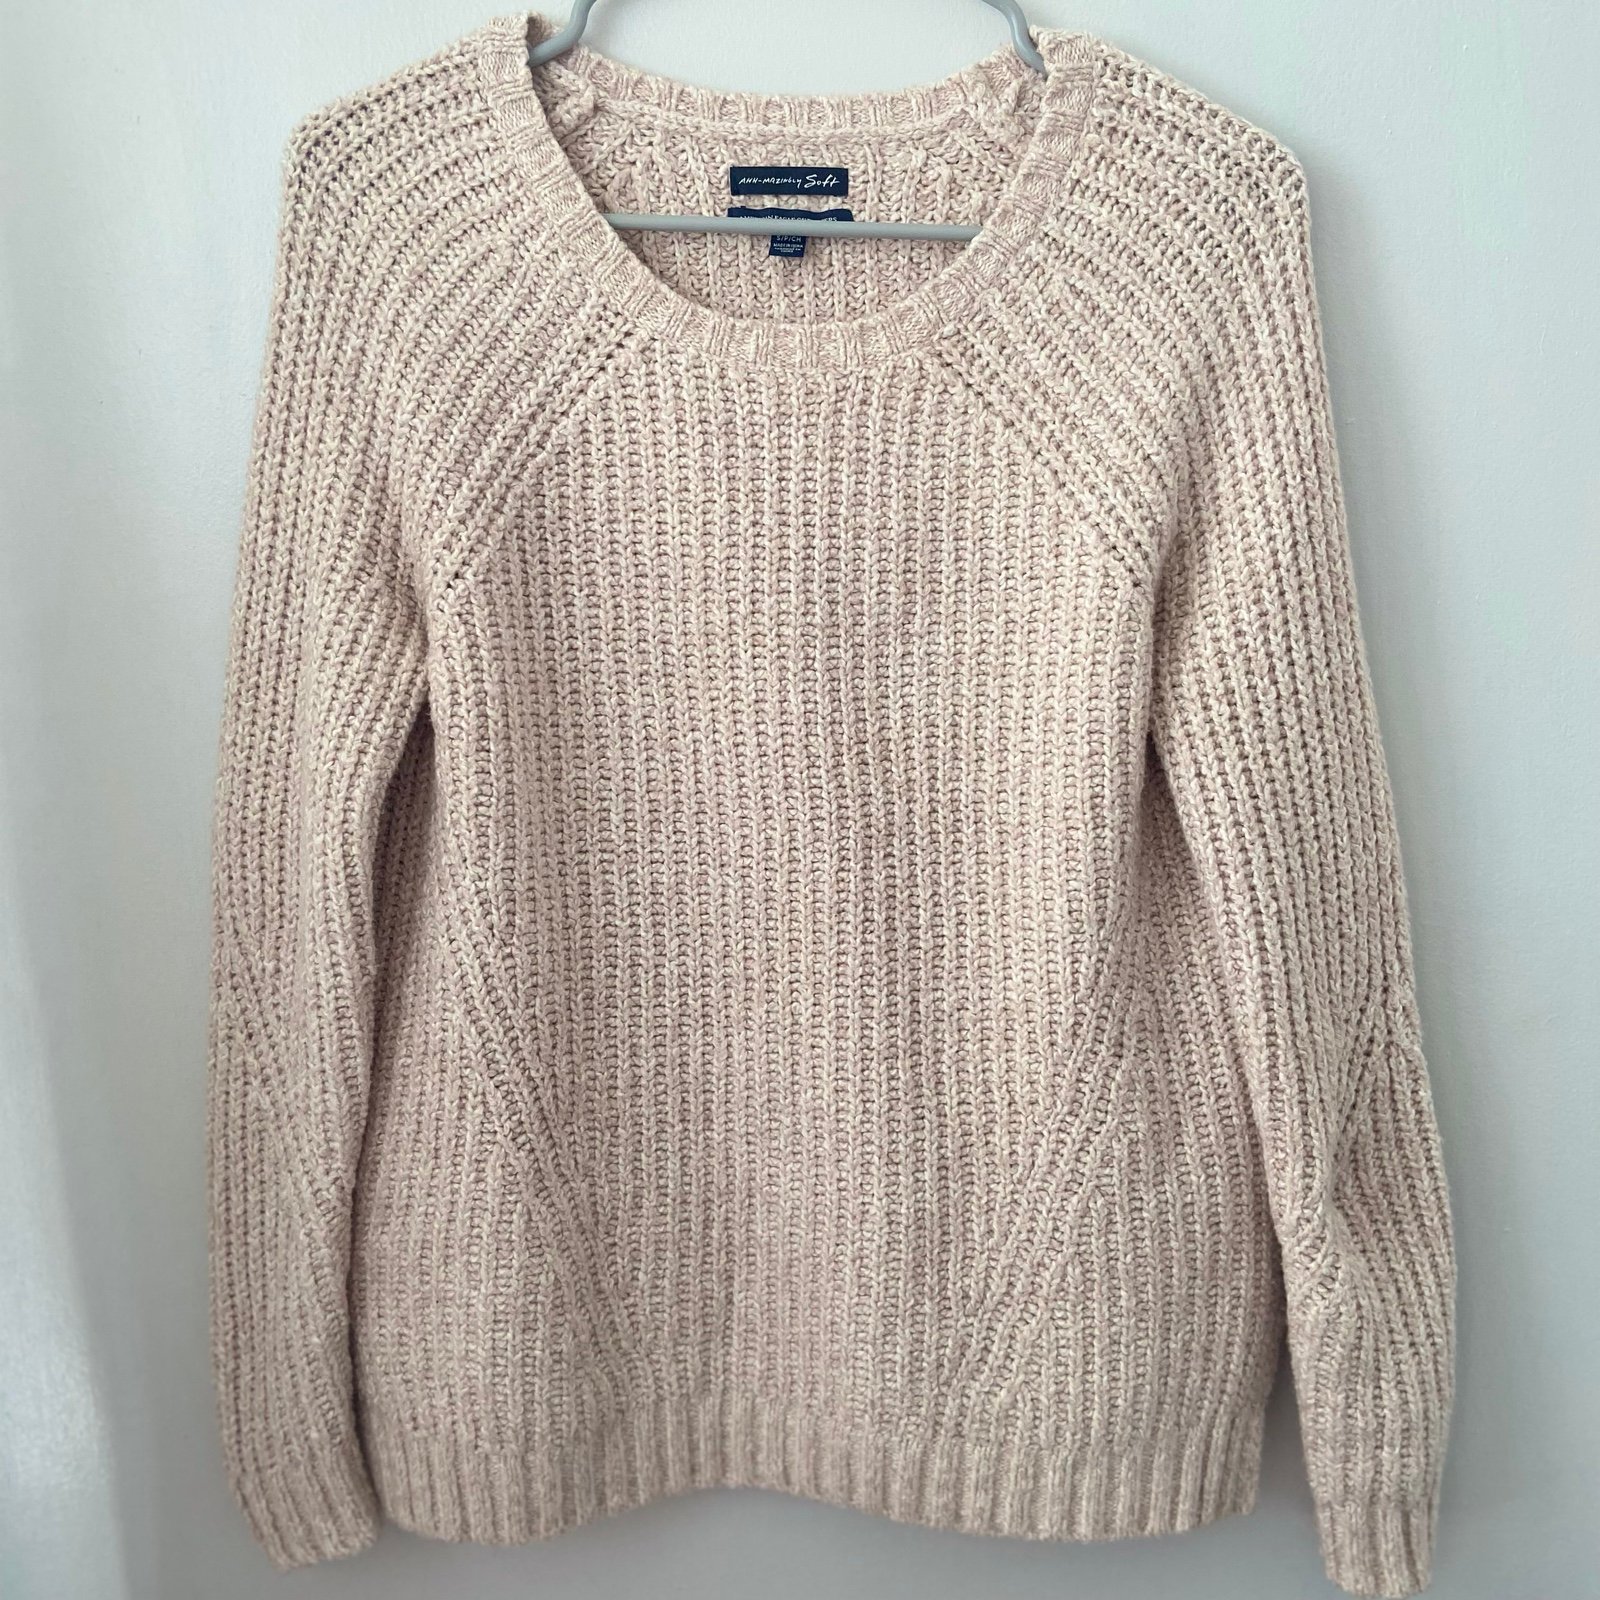 save up to 70% American eagle light pink knit oversized